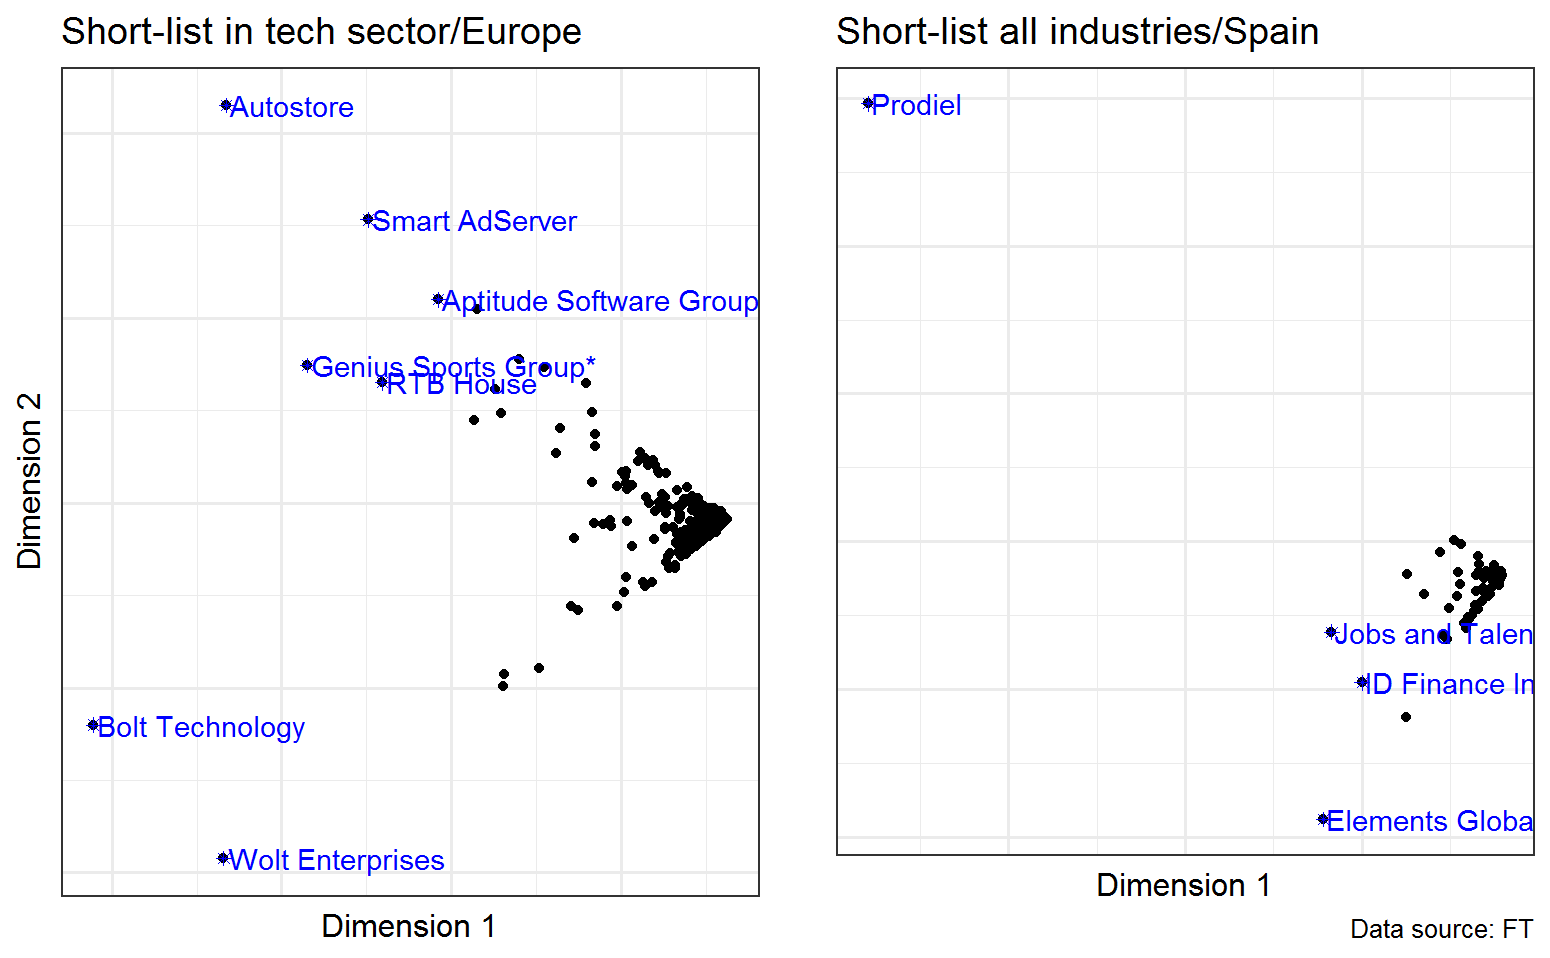 Figures showing how to easily spot singular companies through dimensionality reduction.